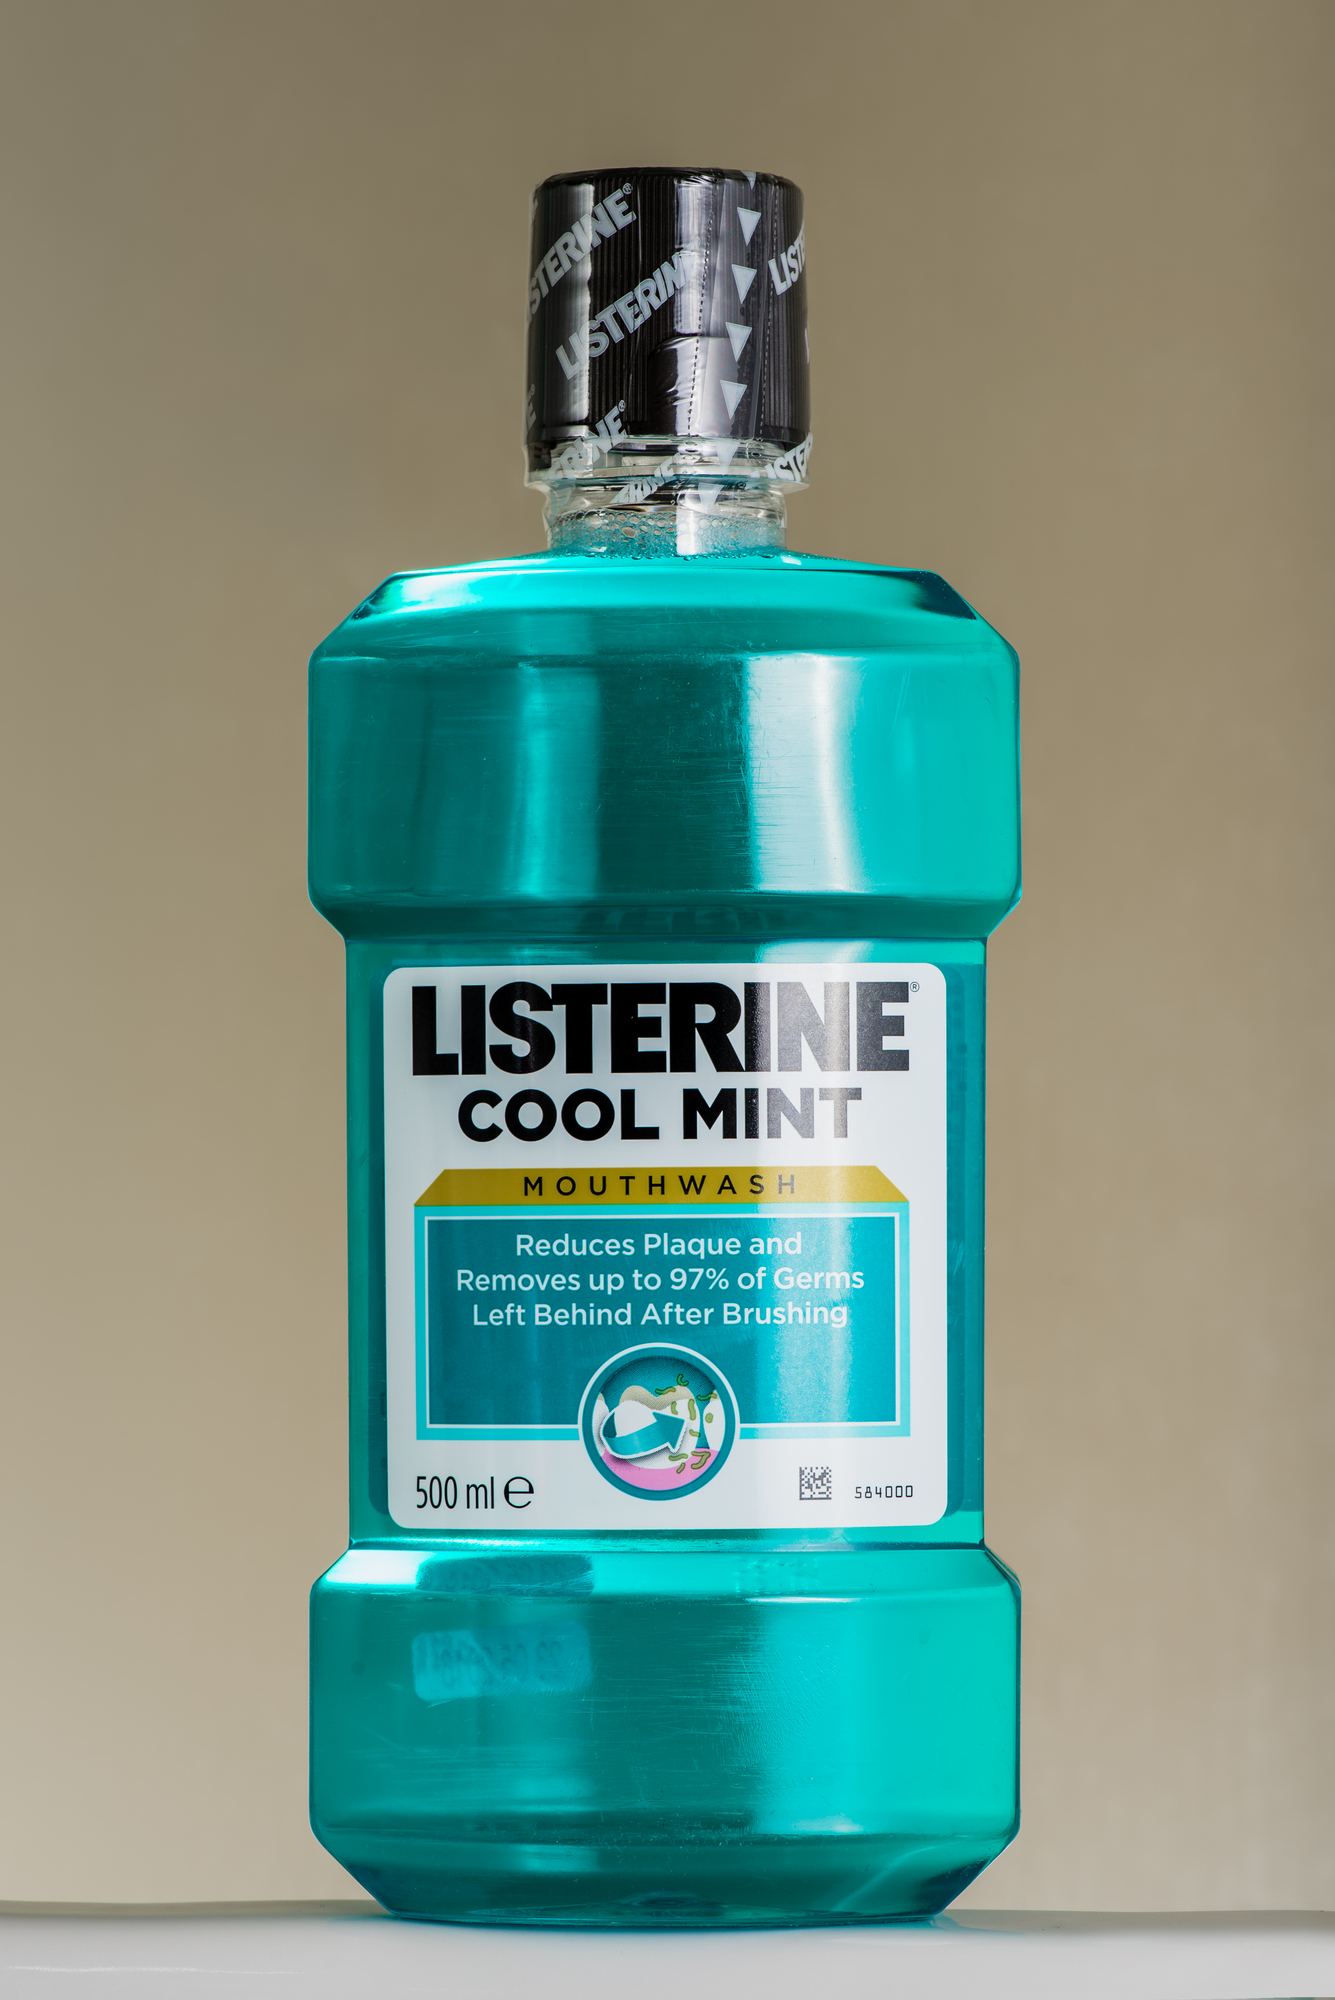 Mouthwash Isn’t Just for Bad Breath: Here Are 10 Clever Ways To Use It Beyond Oral Health